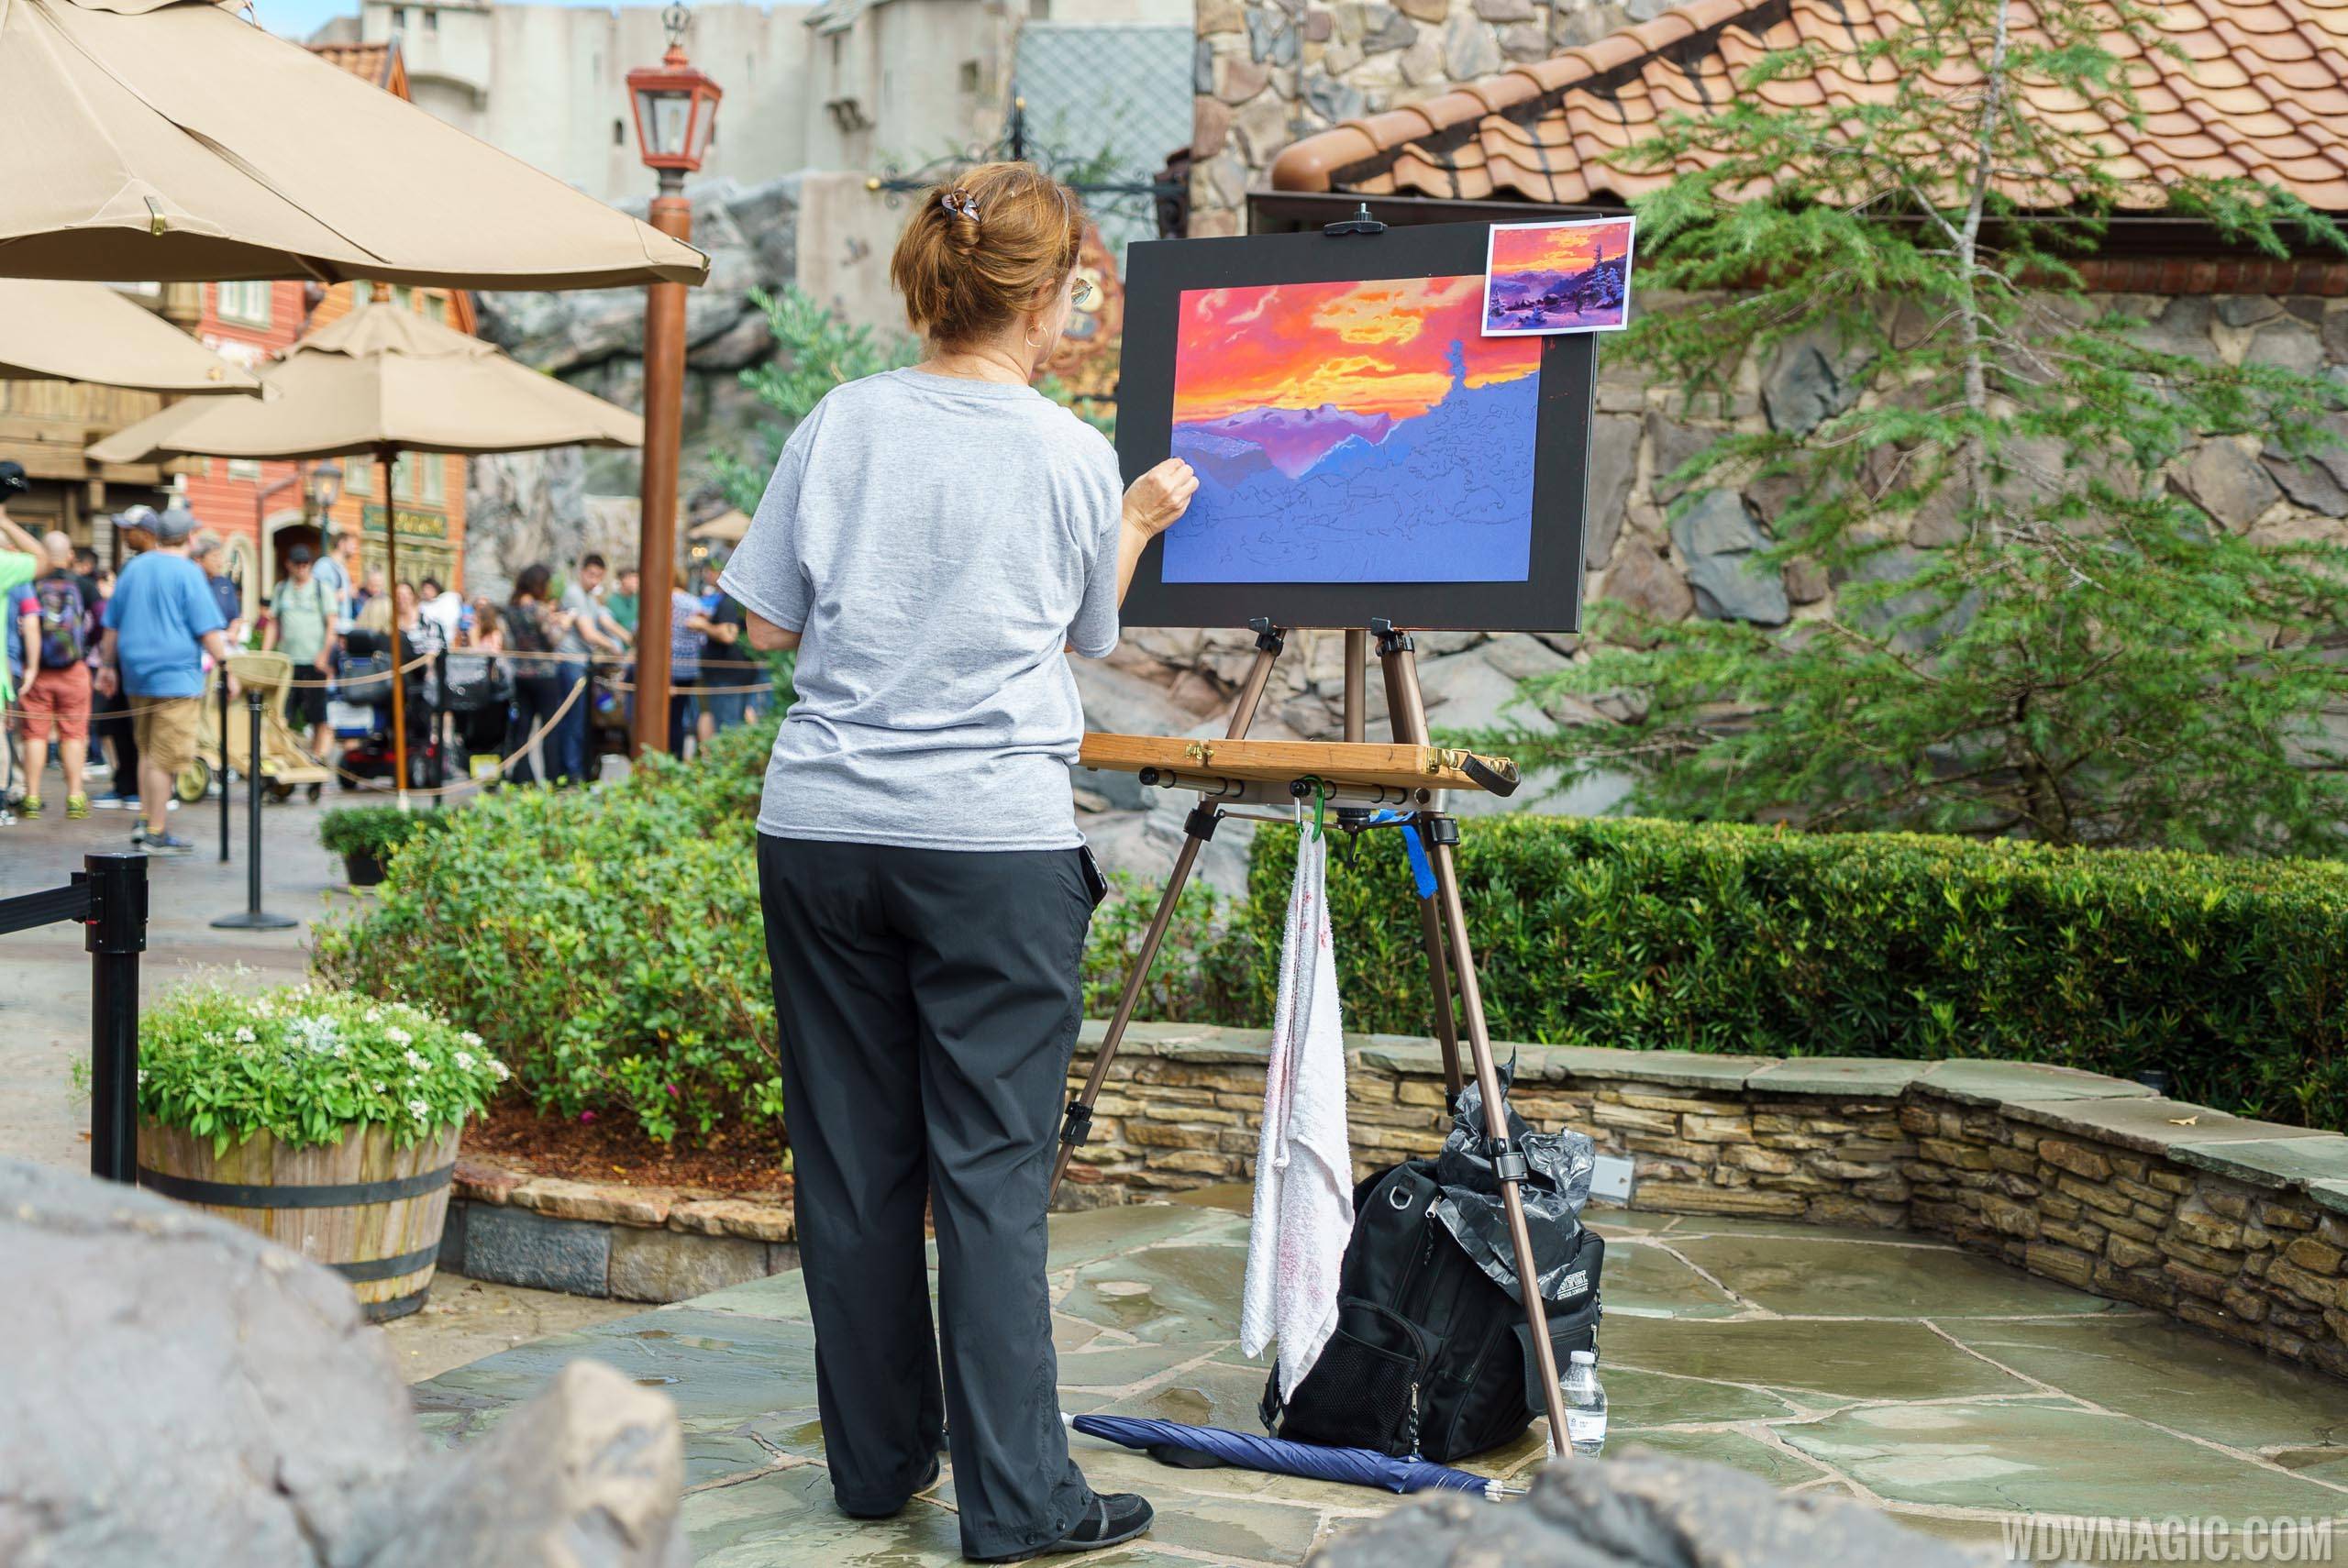 Opening day at the 2017 Epcot International Festival of the Arts